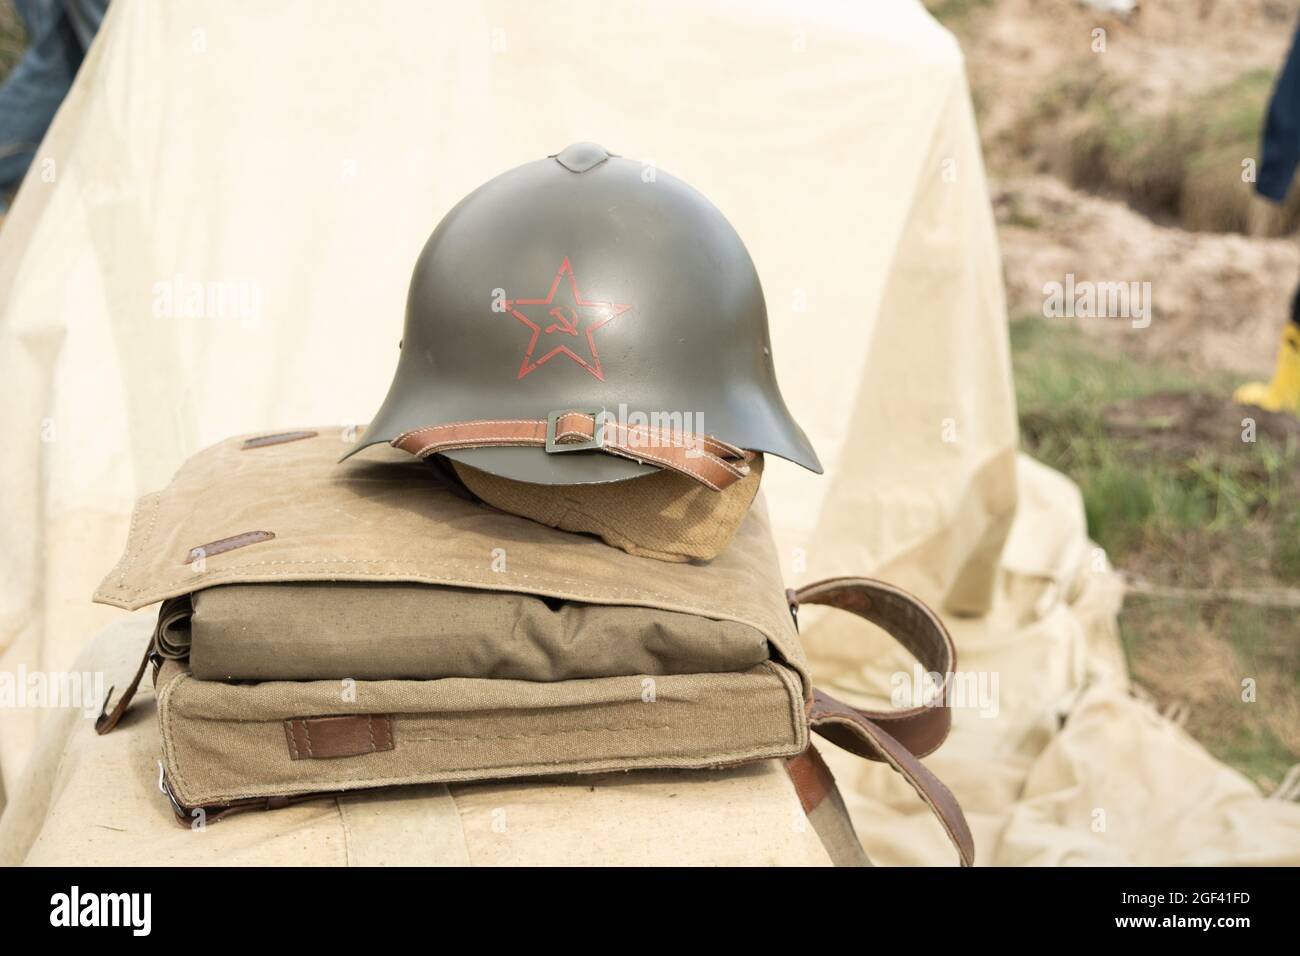 Ammunition helmet, bag and material of soviet union soldier use in world war 2 Stock Photo